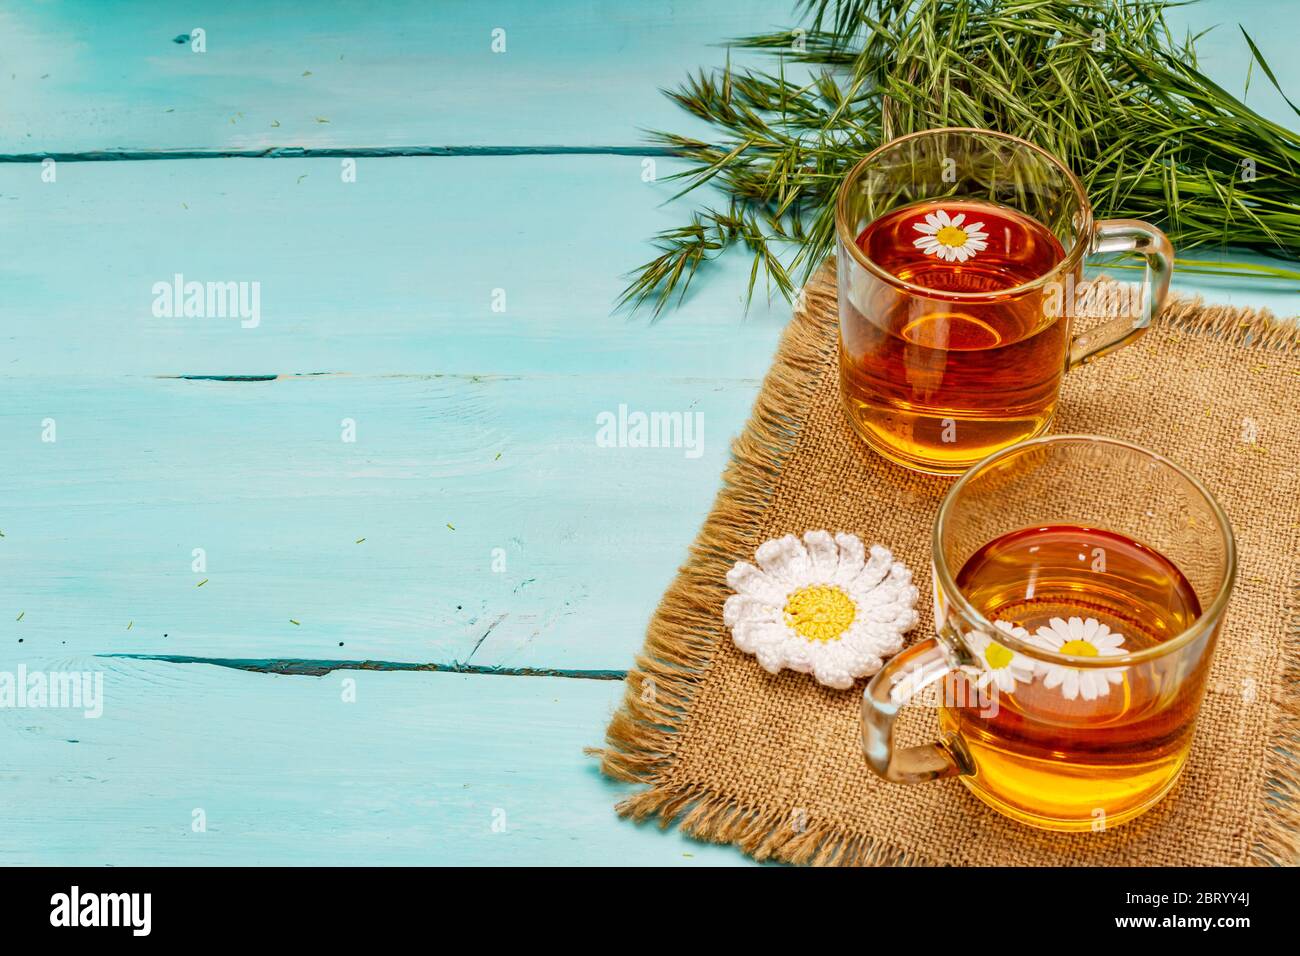 Chamomile tea. Fresh flowers, summer hot drink concept. Alternative medicine, lifestyle. Trendy turquoise wooden boards background, copy space Stock Photo